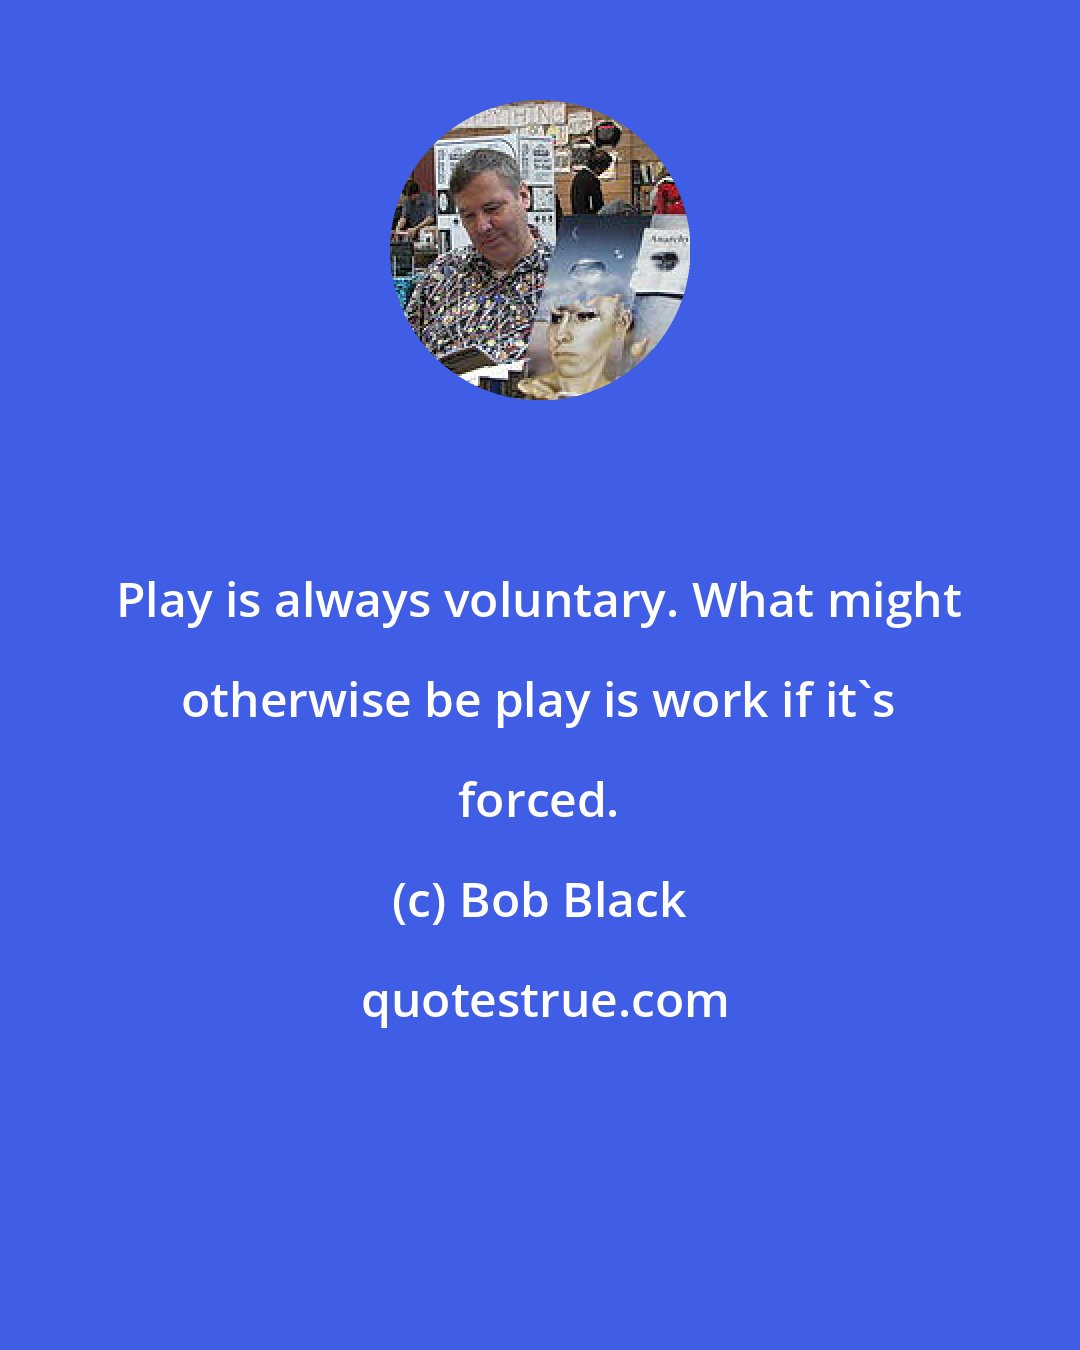 Bob Black: Play is always voluntary. What might otherwise be play is work if it's forced.